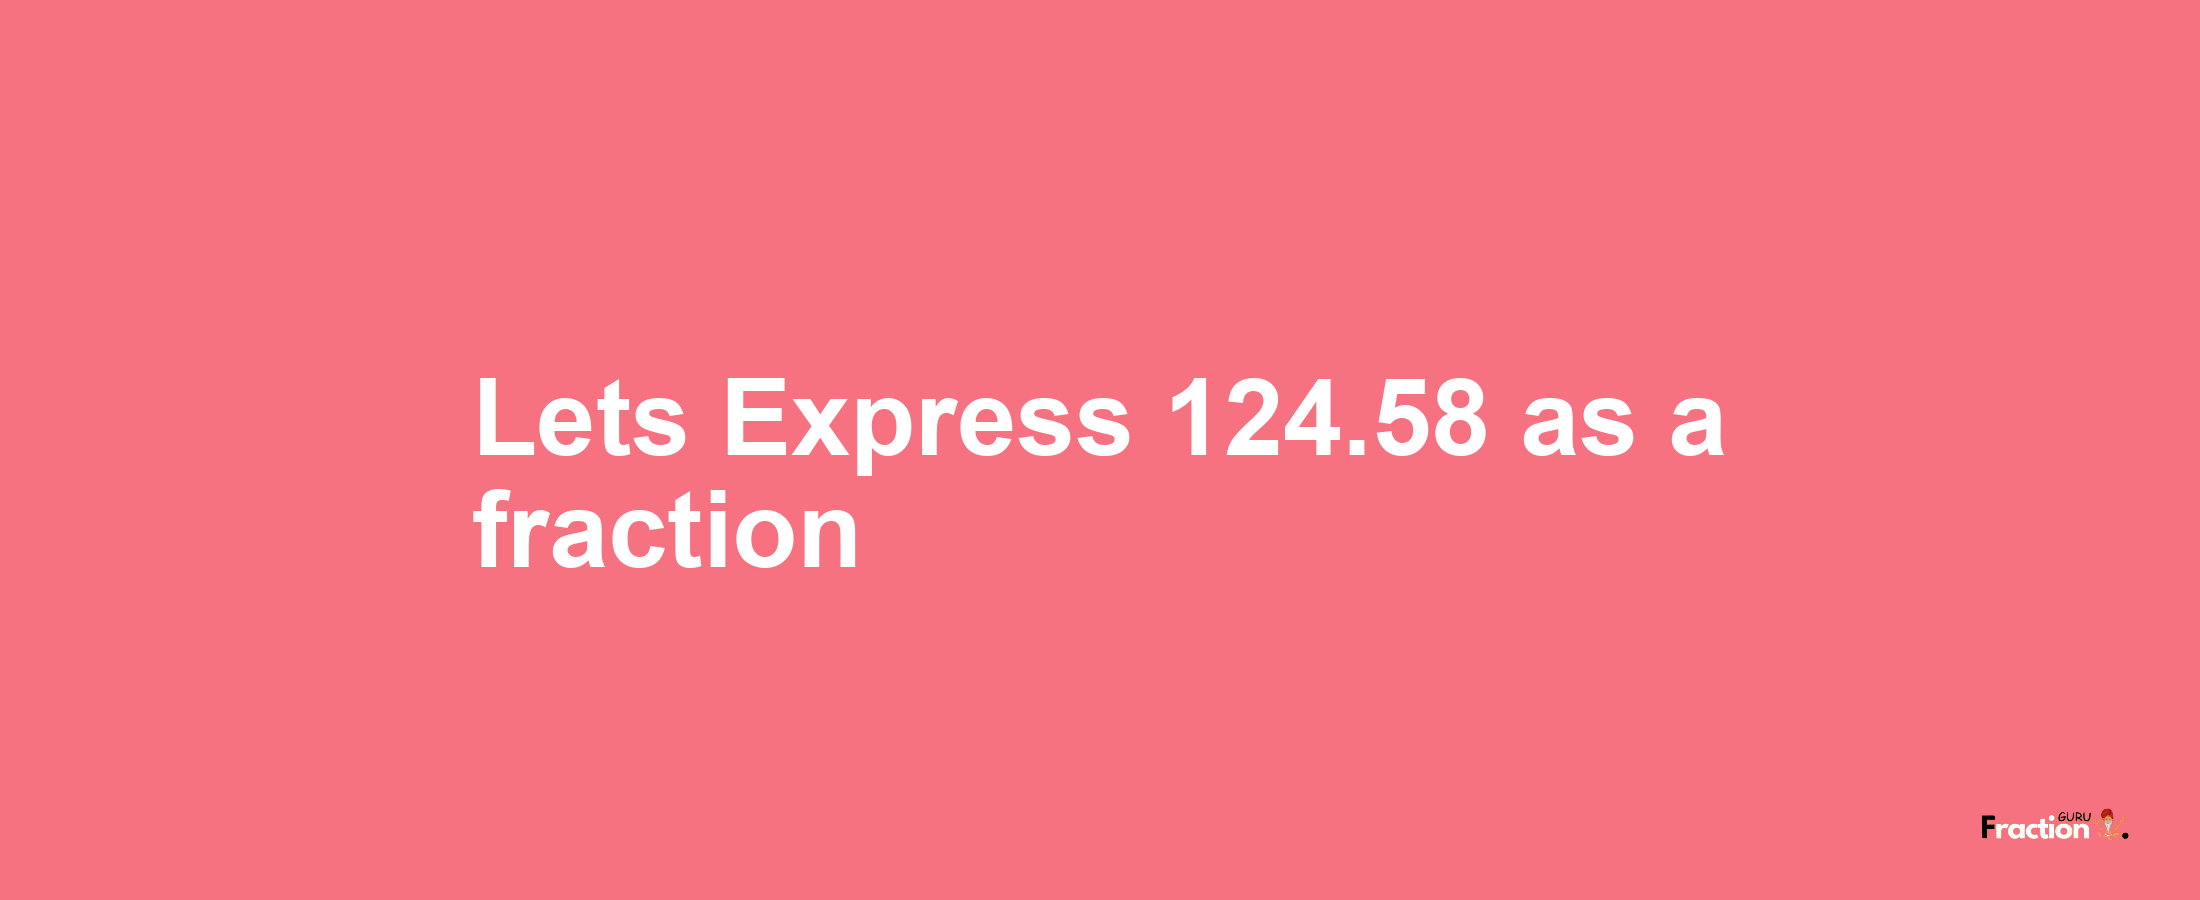 Lets Express 124.58 as afraction